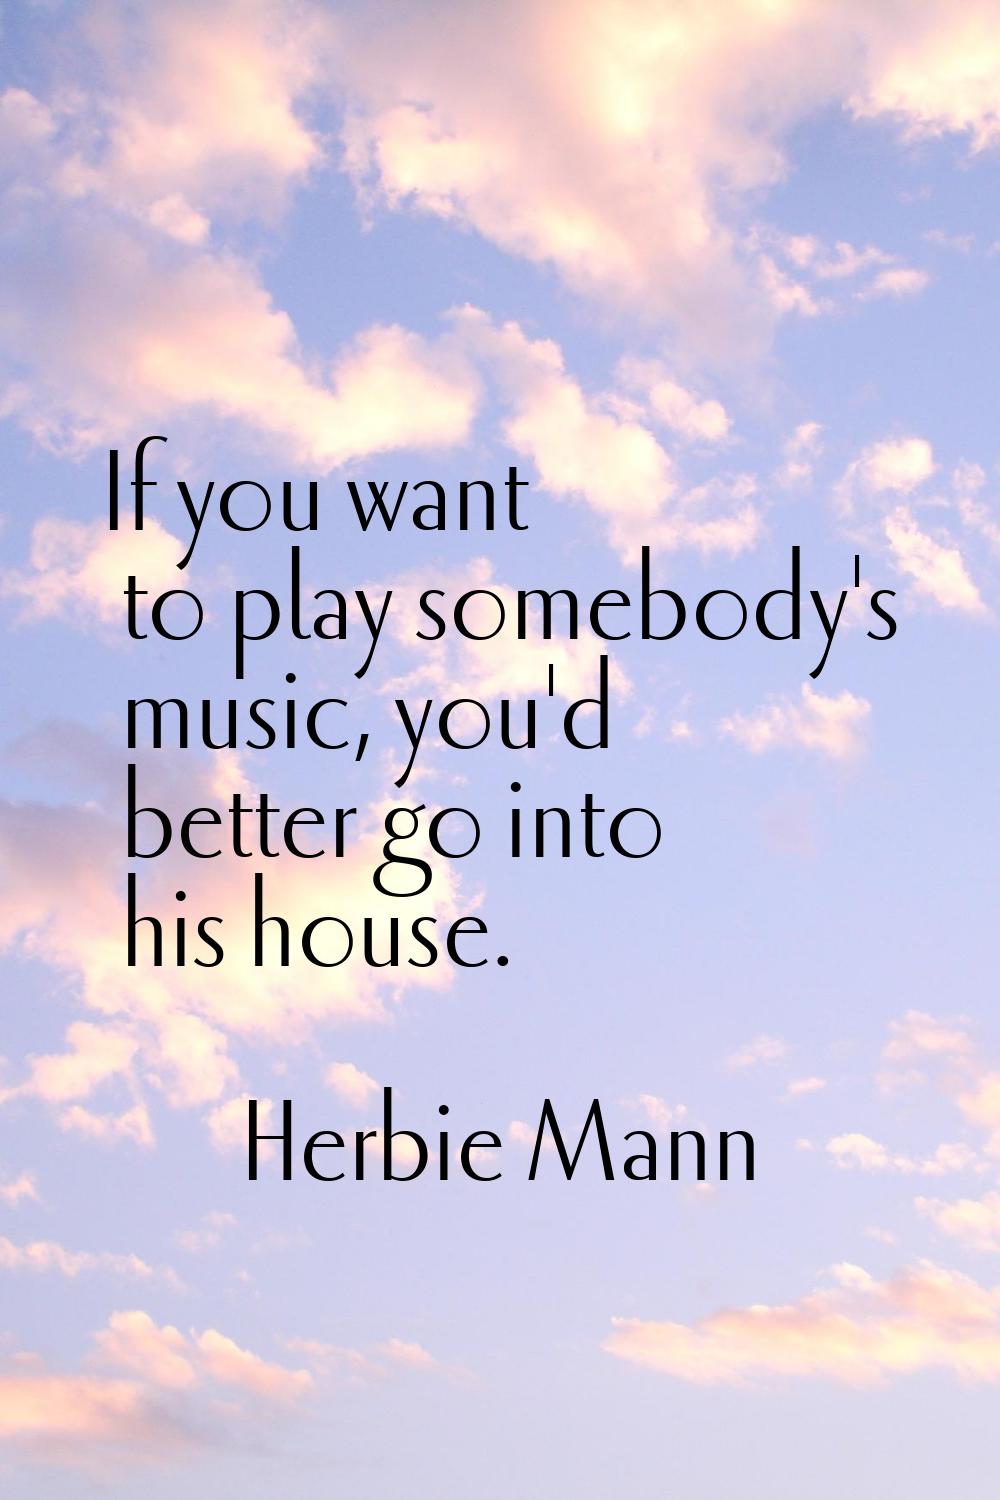 If you want to play somebody's music, you'd better go into his house.